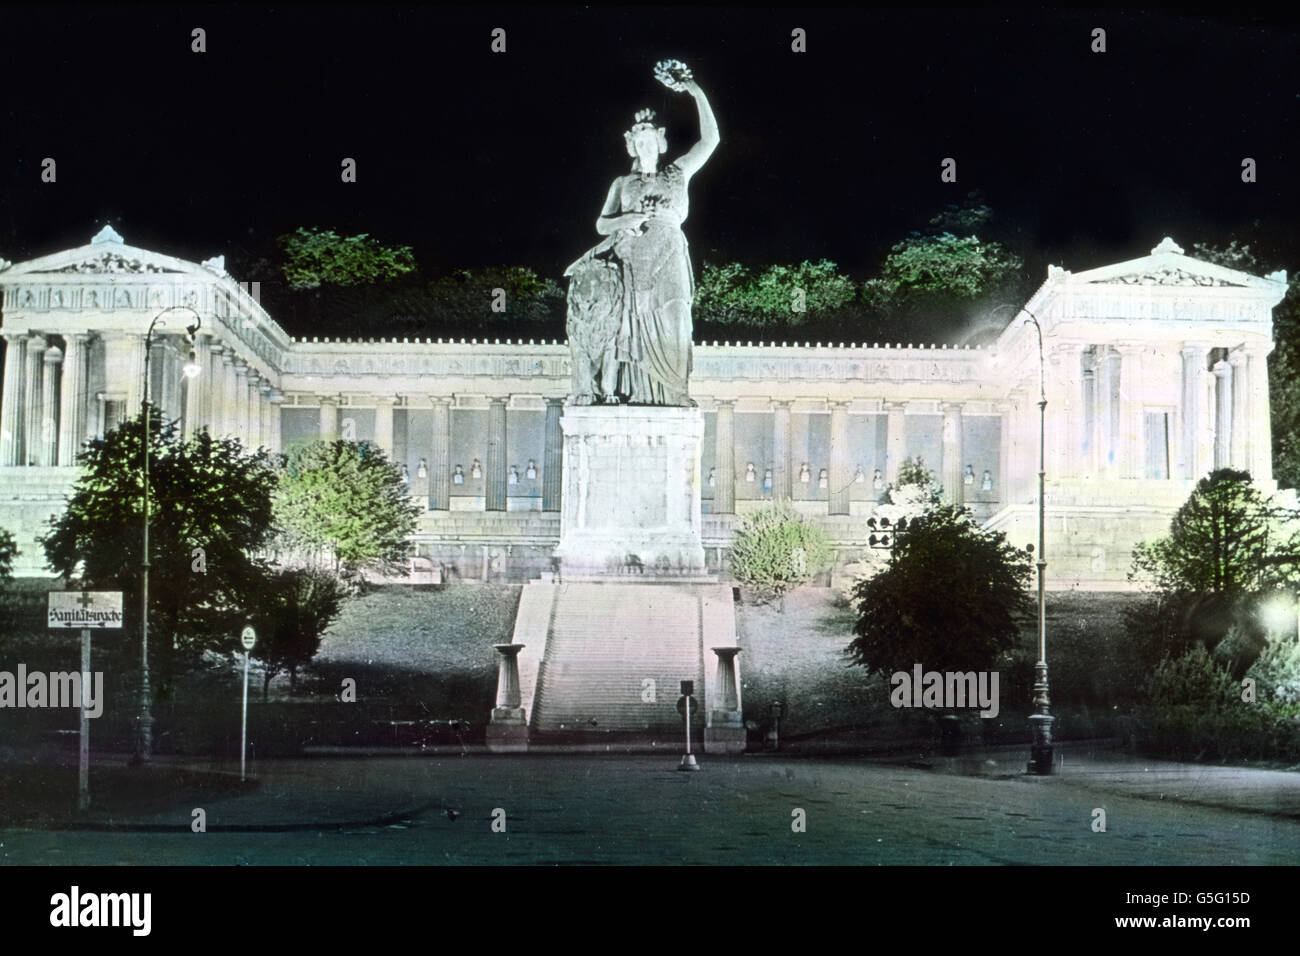 Bavaria und Ruhmeshalle im nächtlichen München. Statue of Bavaria and Hall Of Fame in Munich by night. Bavaria, history, historical, 1910s, 1920s, 20th century, archive, Carl Simon, hand coloured glass slide, statue, allegory, building, architecture, night, long time exposure, light, night, landmark Stock Photo